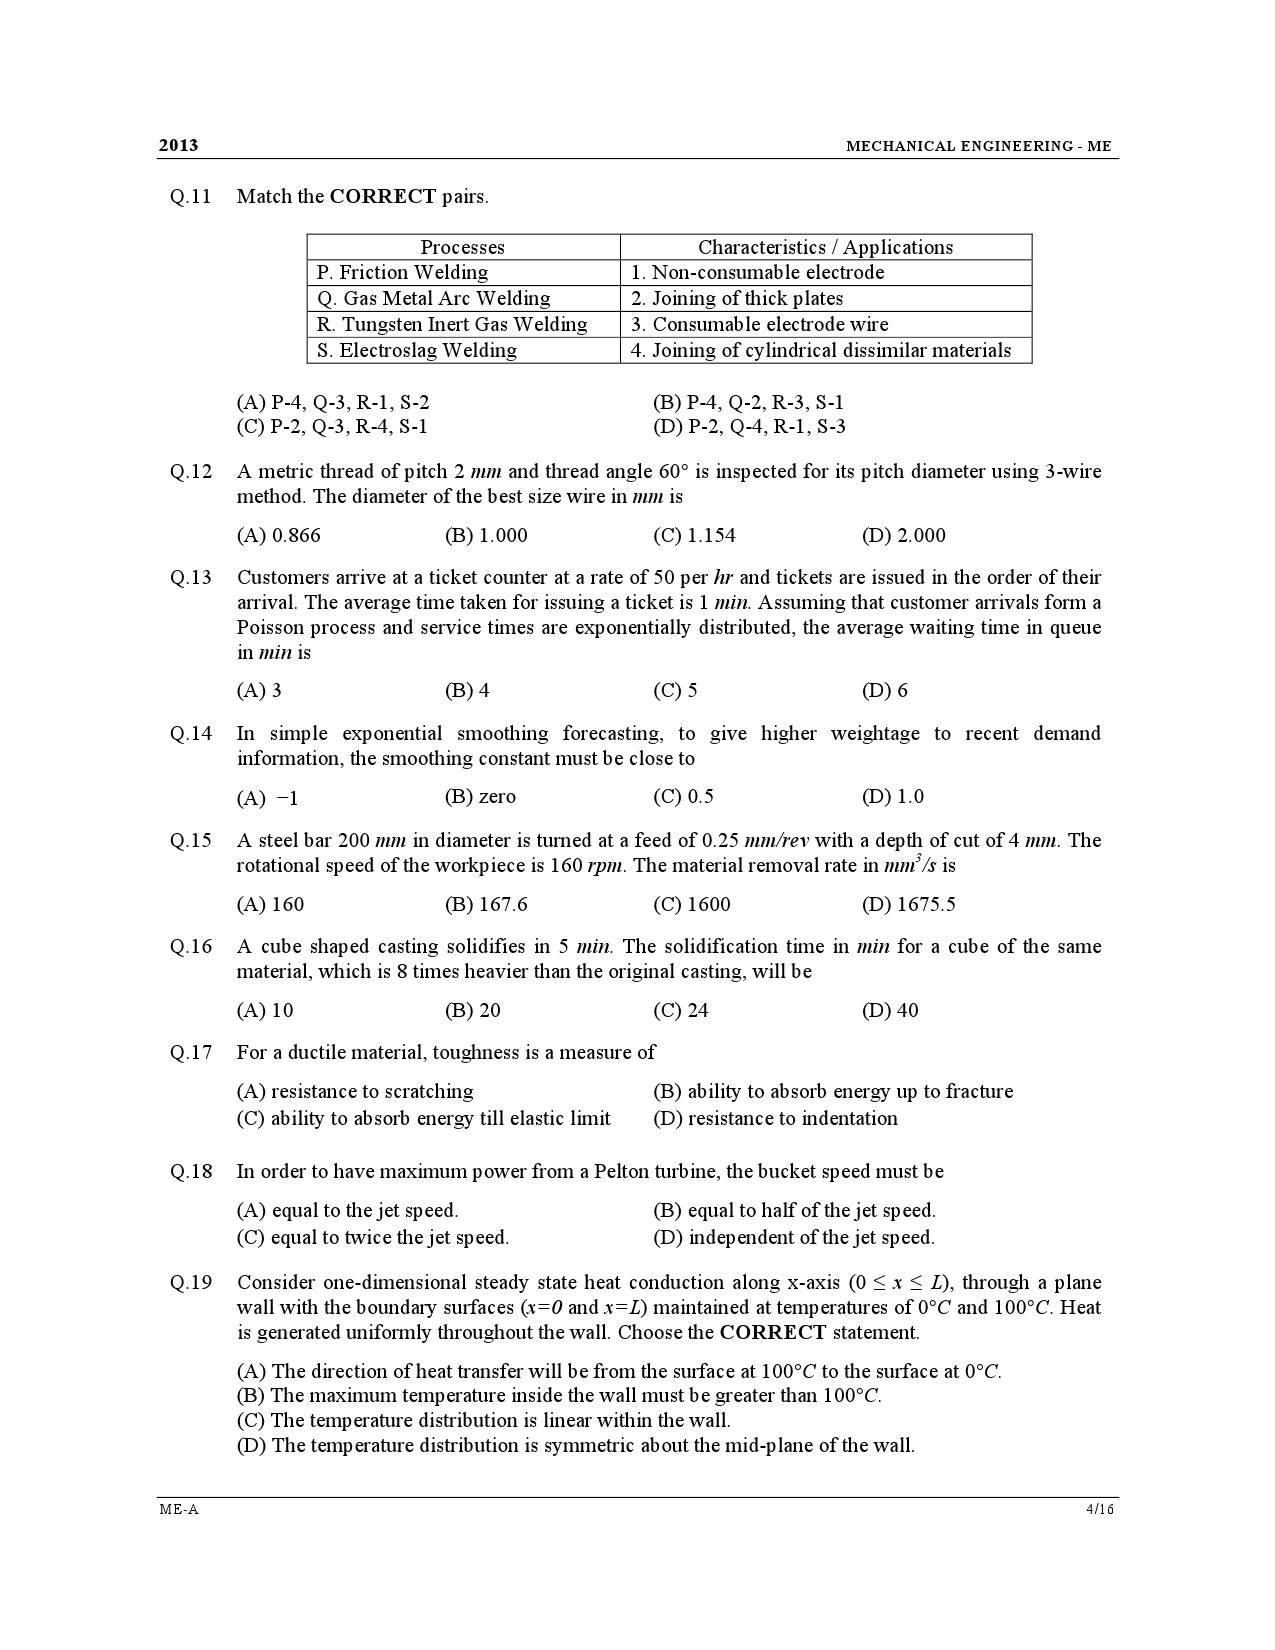 GATE Exam Question Paper 2013 Mechanical Engineering 4